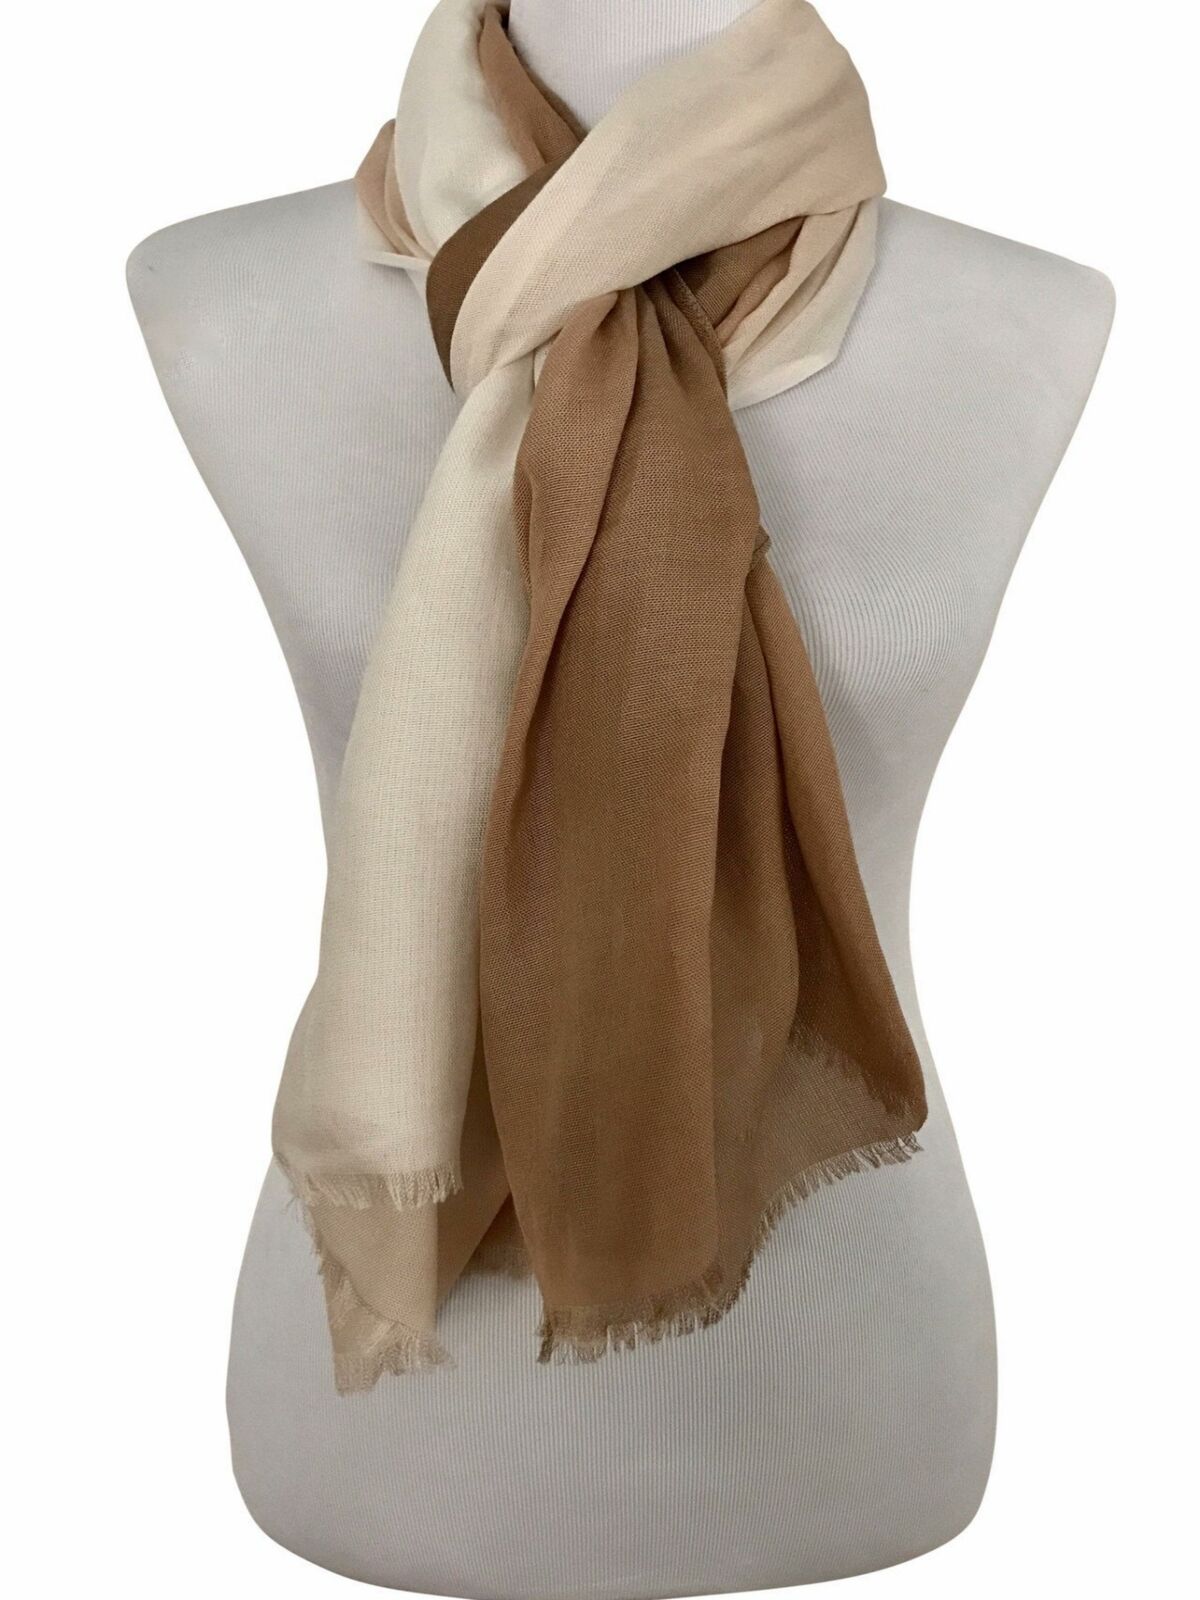 Ethical Graded Wool Scarves